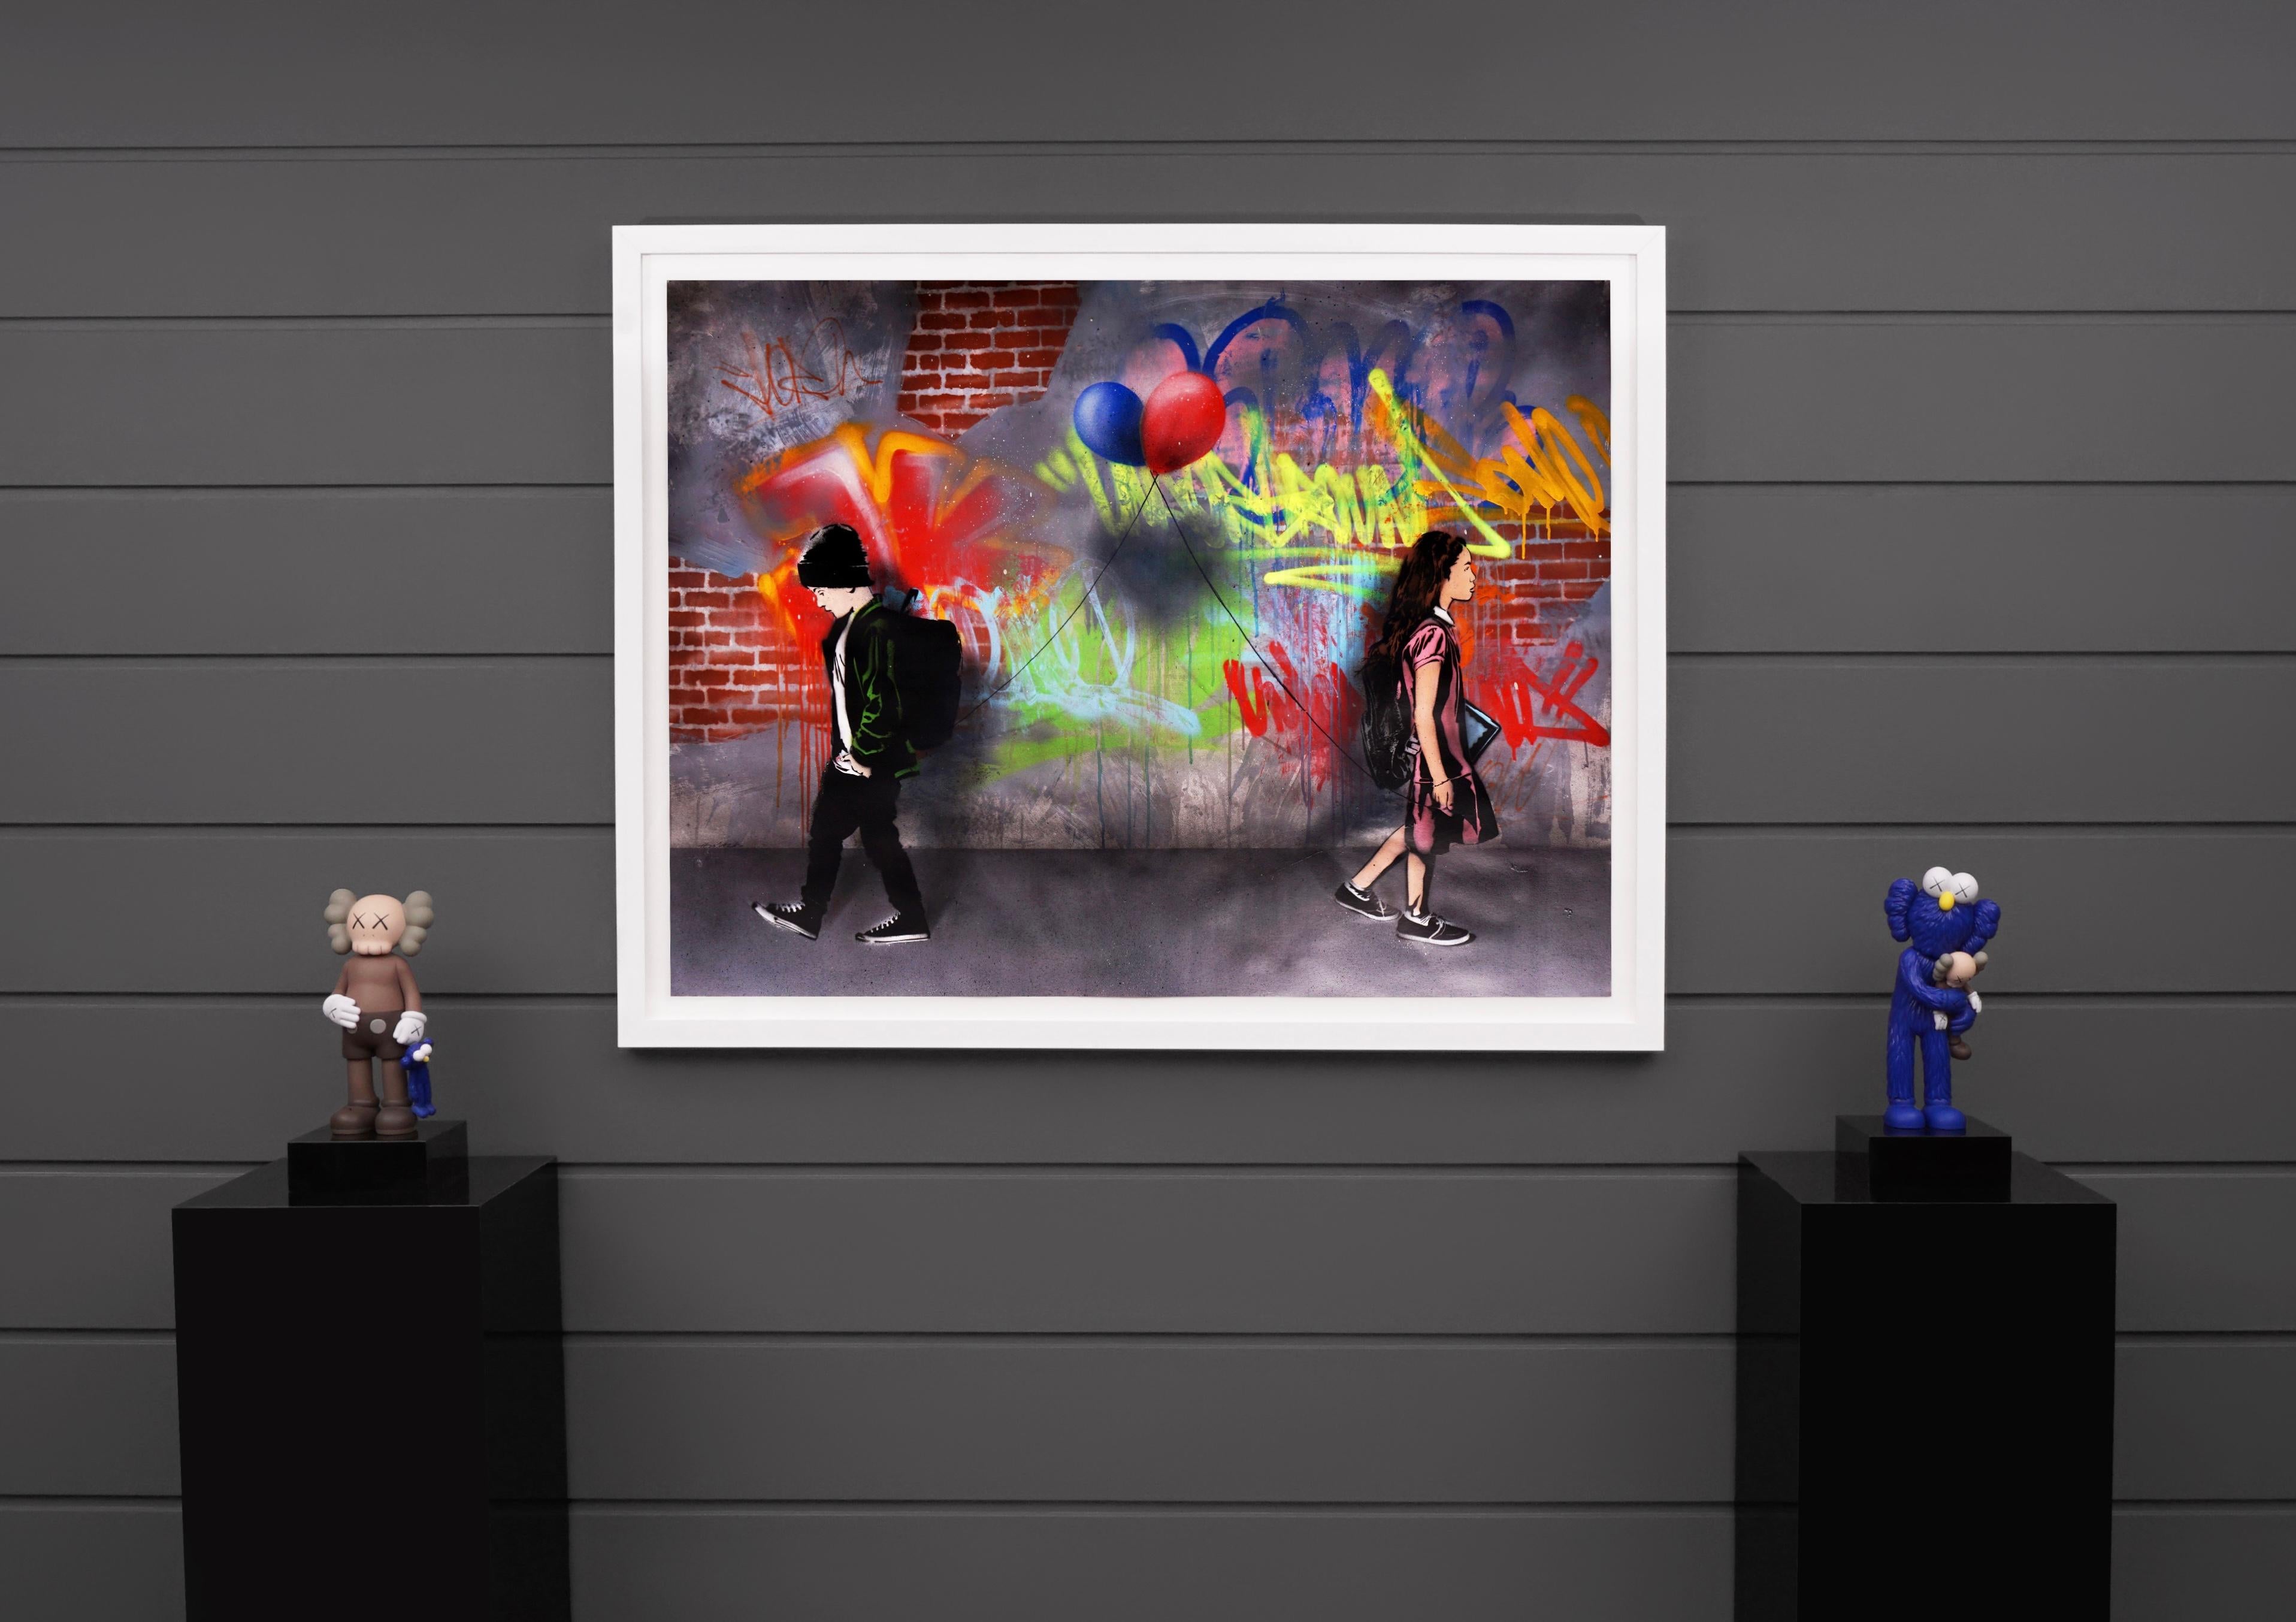 The street pop-art ‘Static Love with Balloons’ is an acrylic, stencil, and mixed media painting on paper by the contemporary street-artist prodigy, Hijack, created in 2021. A saturated cultural commentary on connection regardless of age, gender, or